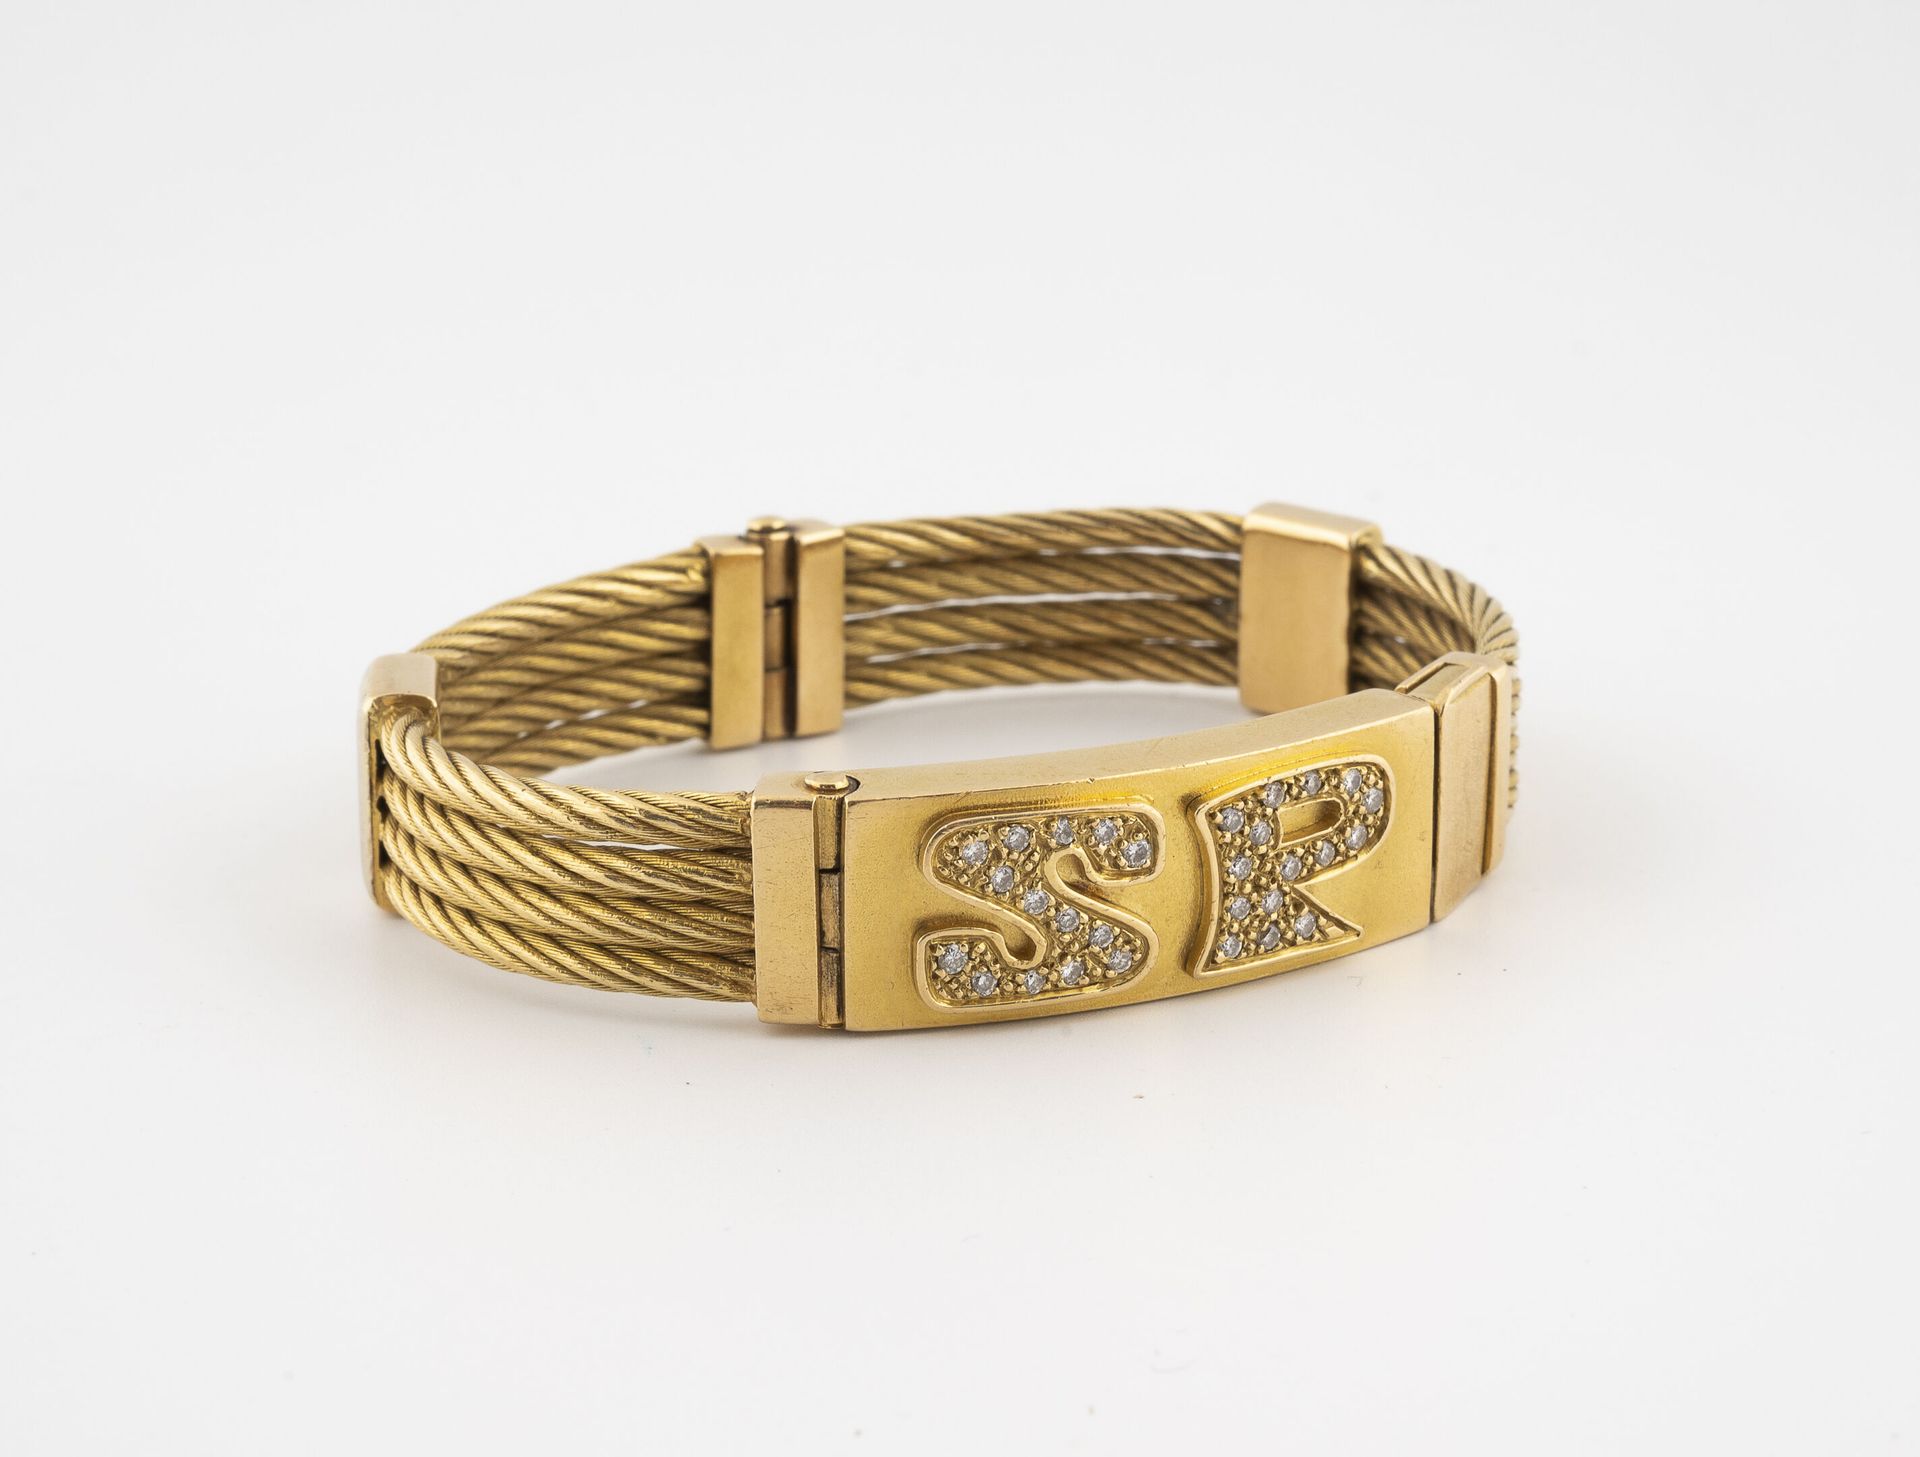 Null Gourmette bracelet with 4 rows of yellow gold (750) filaments, centered on &hellip;